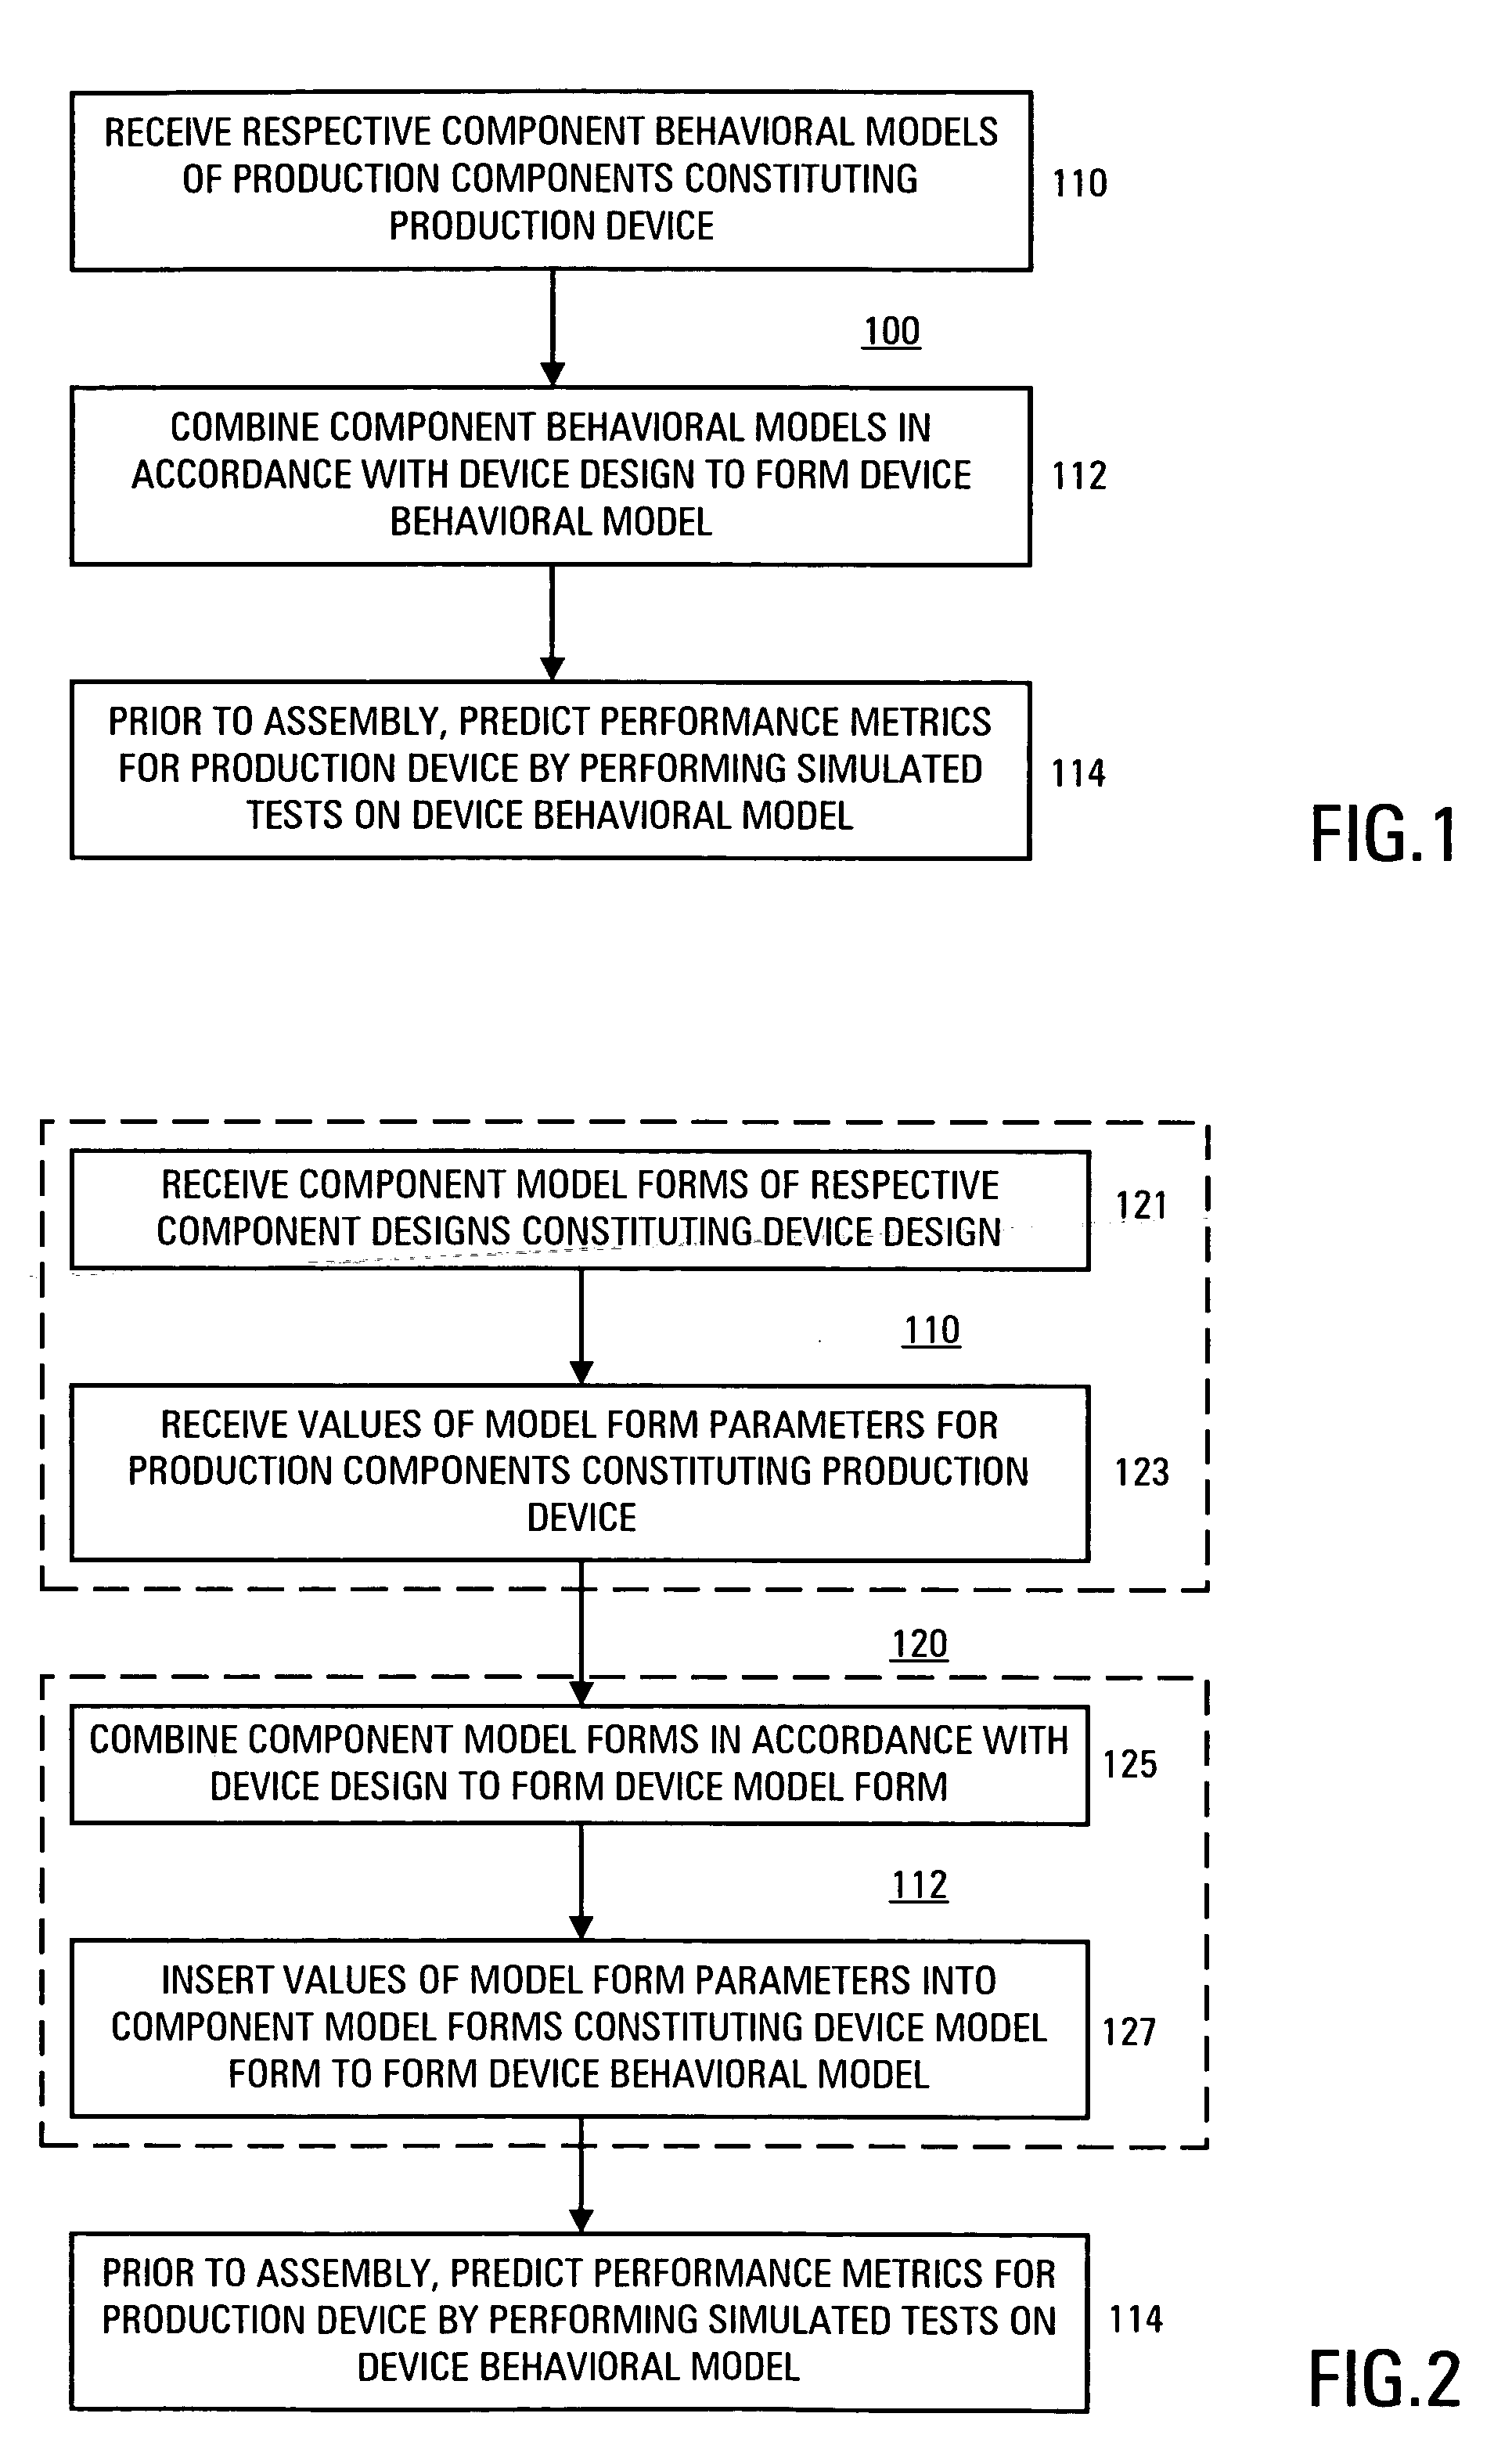 Model-based pre-assembly testing of multi-component production devices